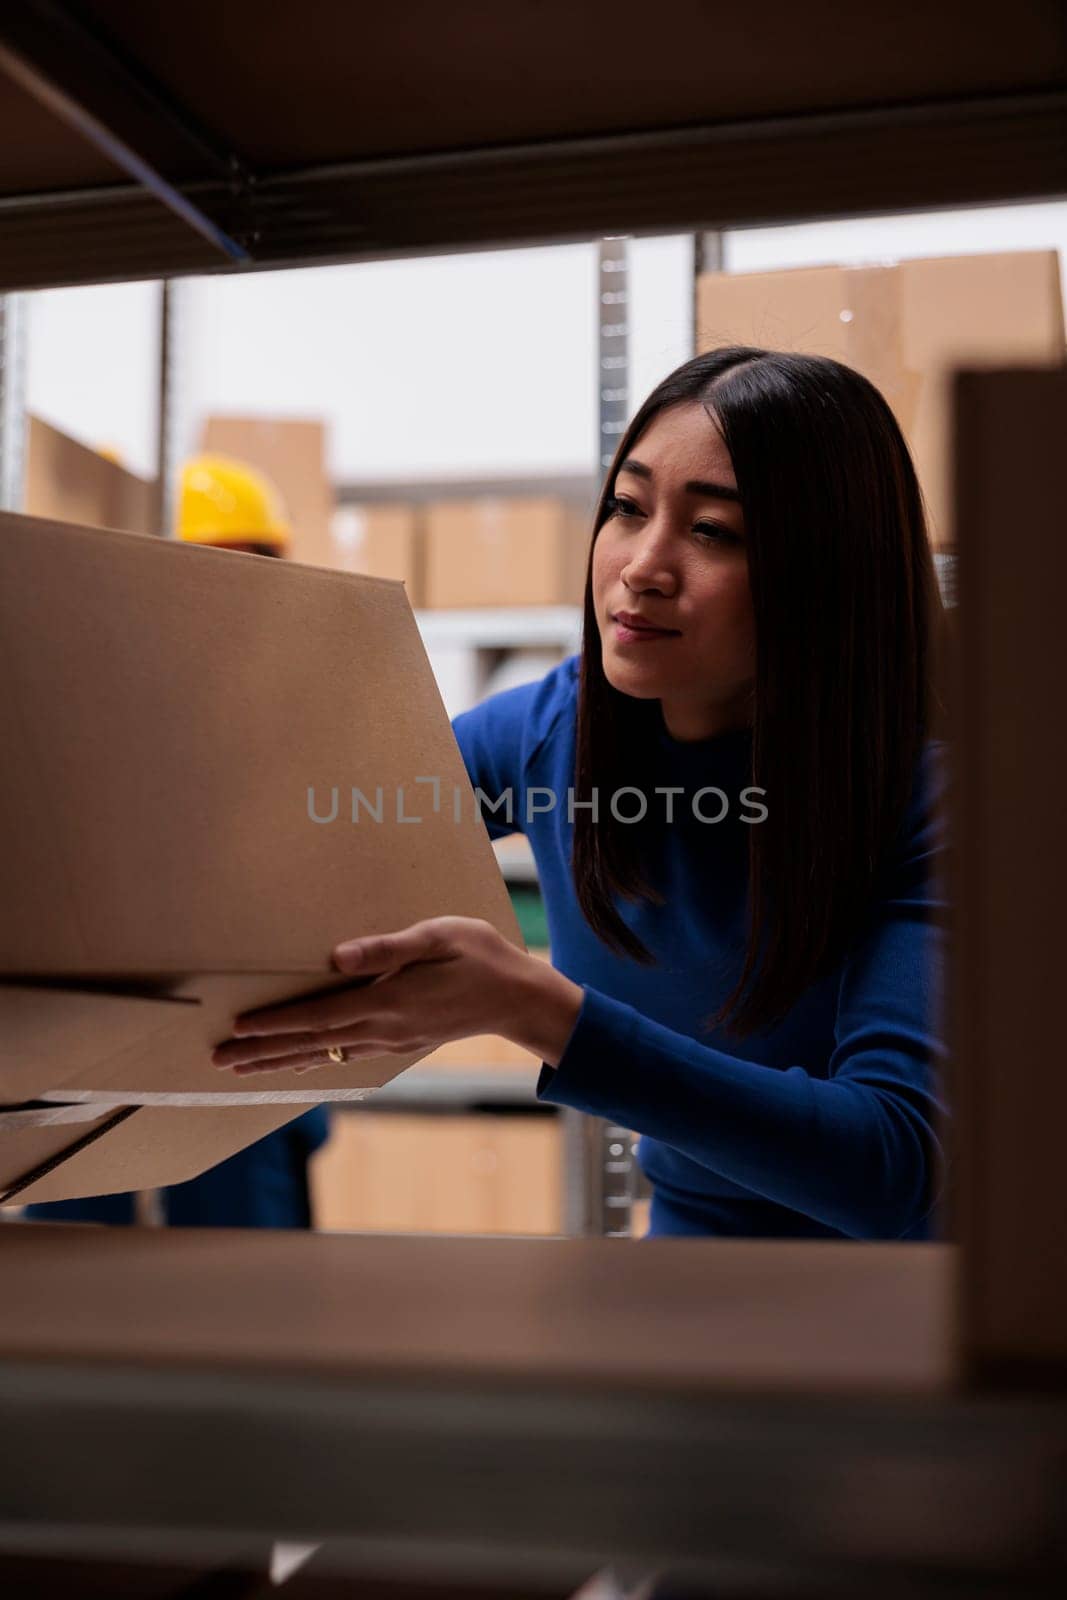 Goods supply chain manager doing inventory in warehouse by DCStudio